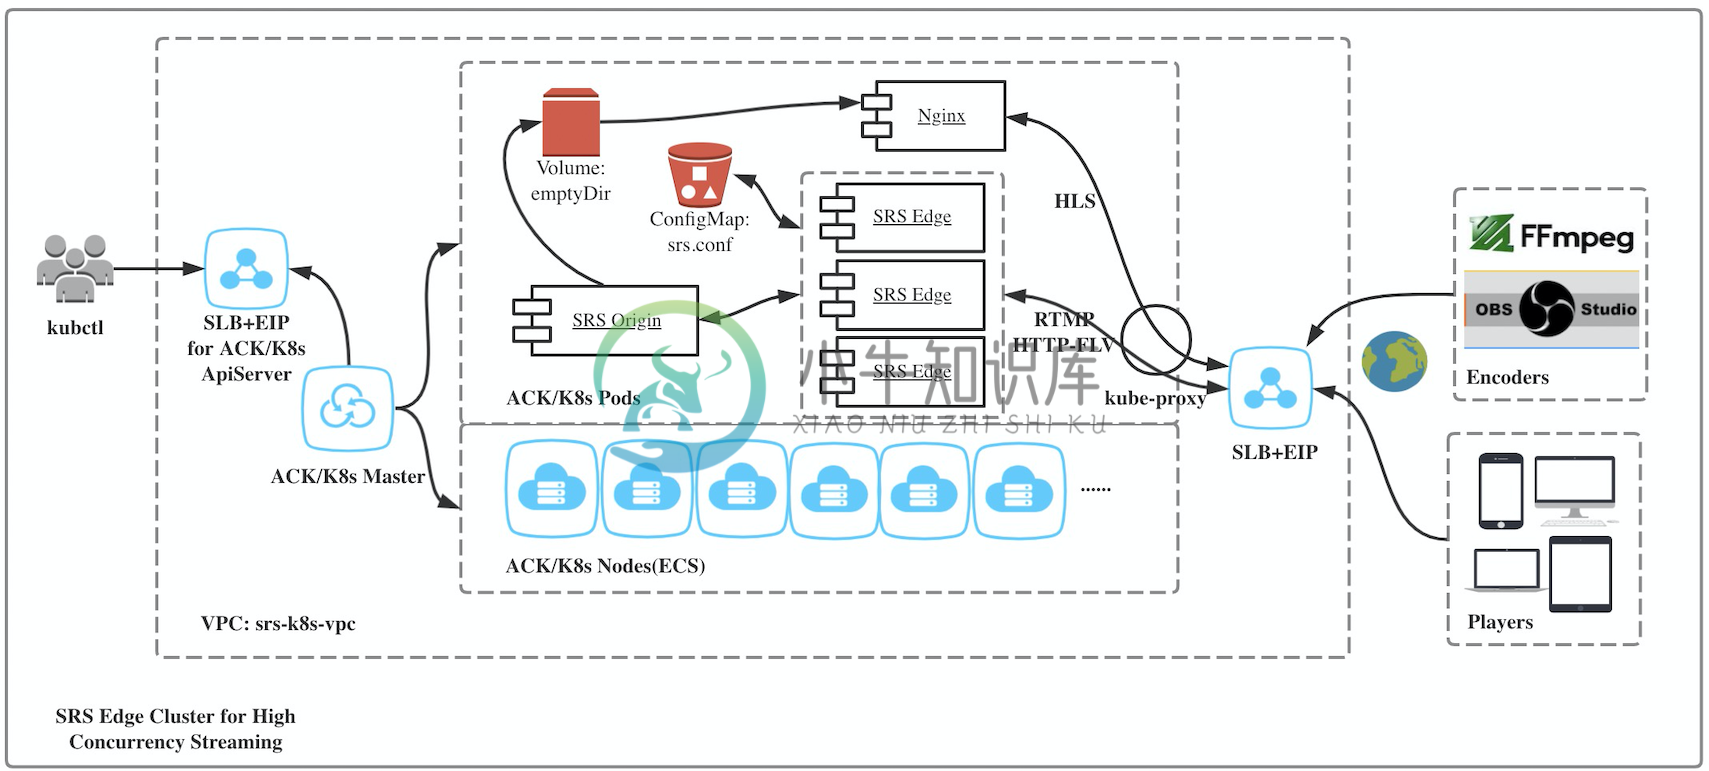 ACK: SRS Edge Cluster for High Concurrency Streaming